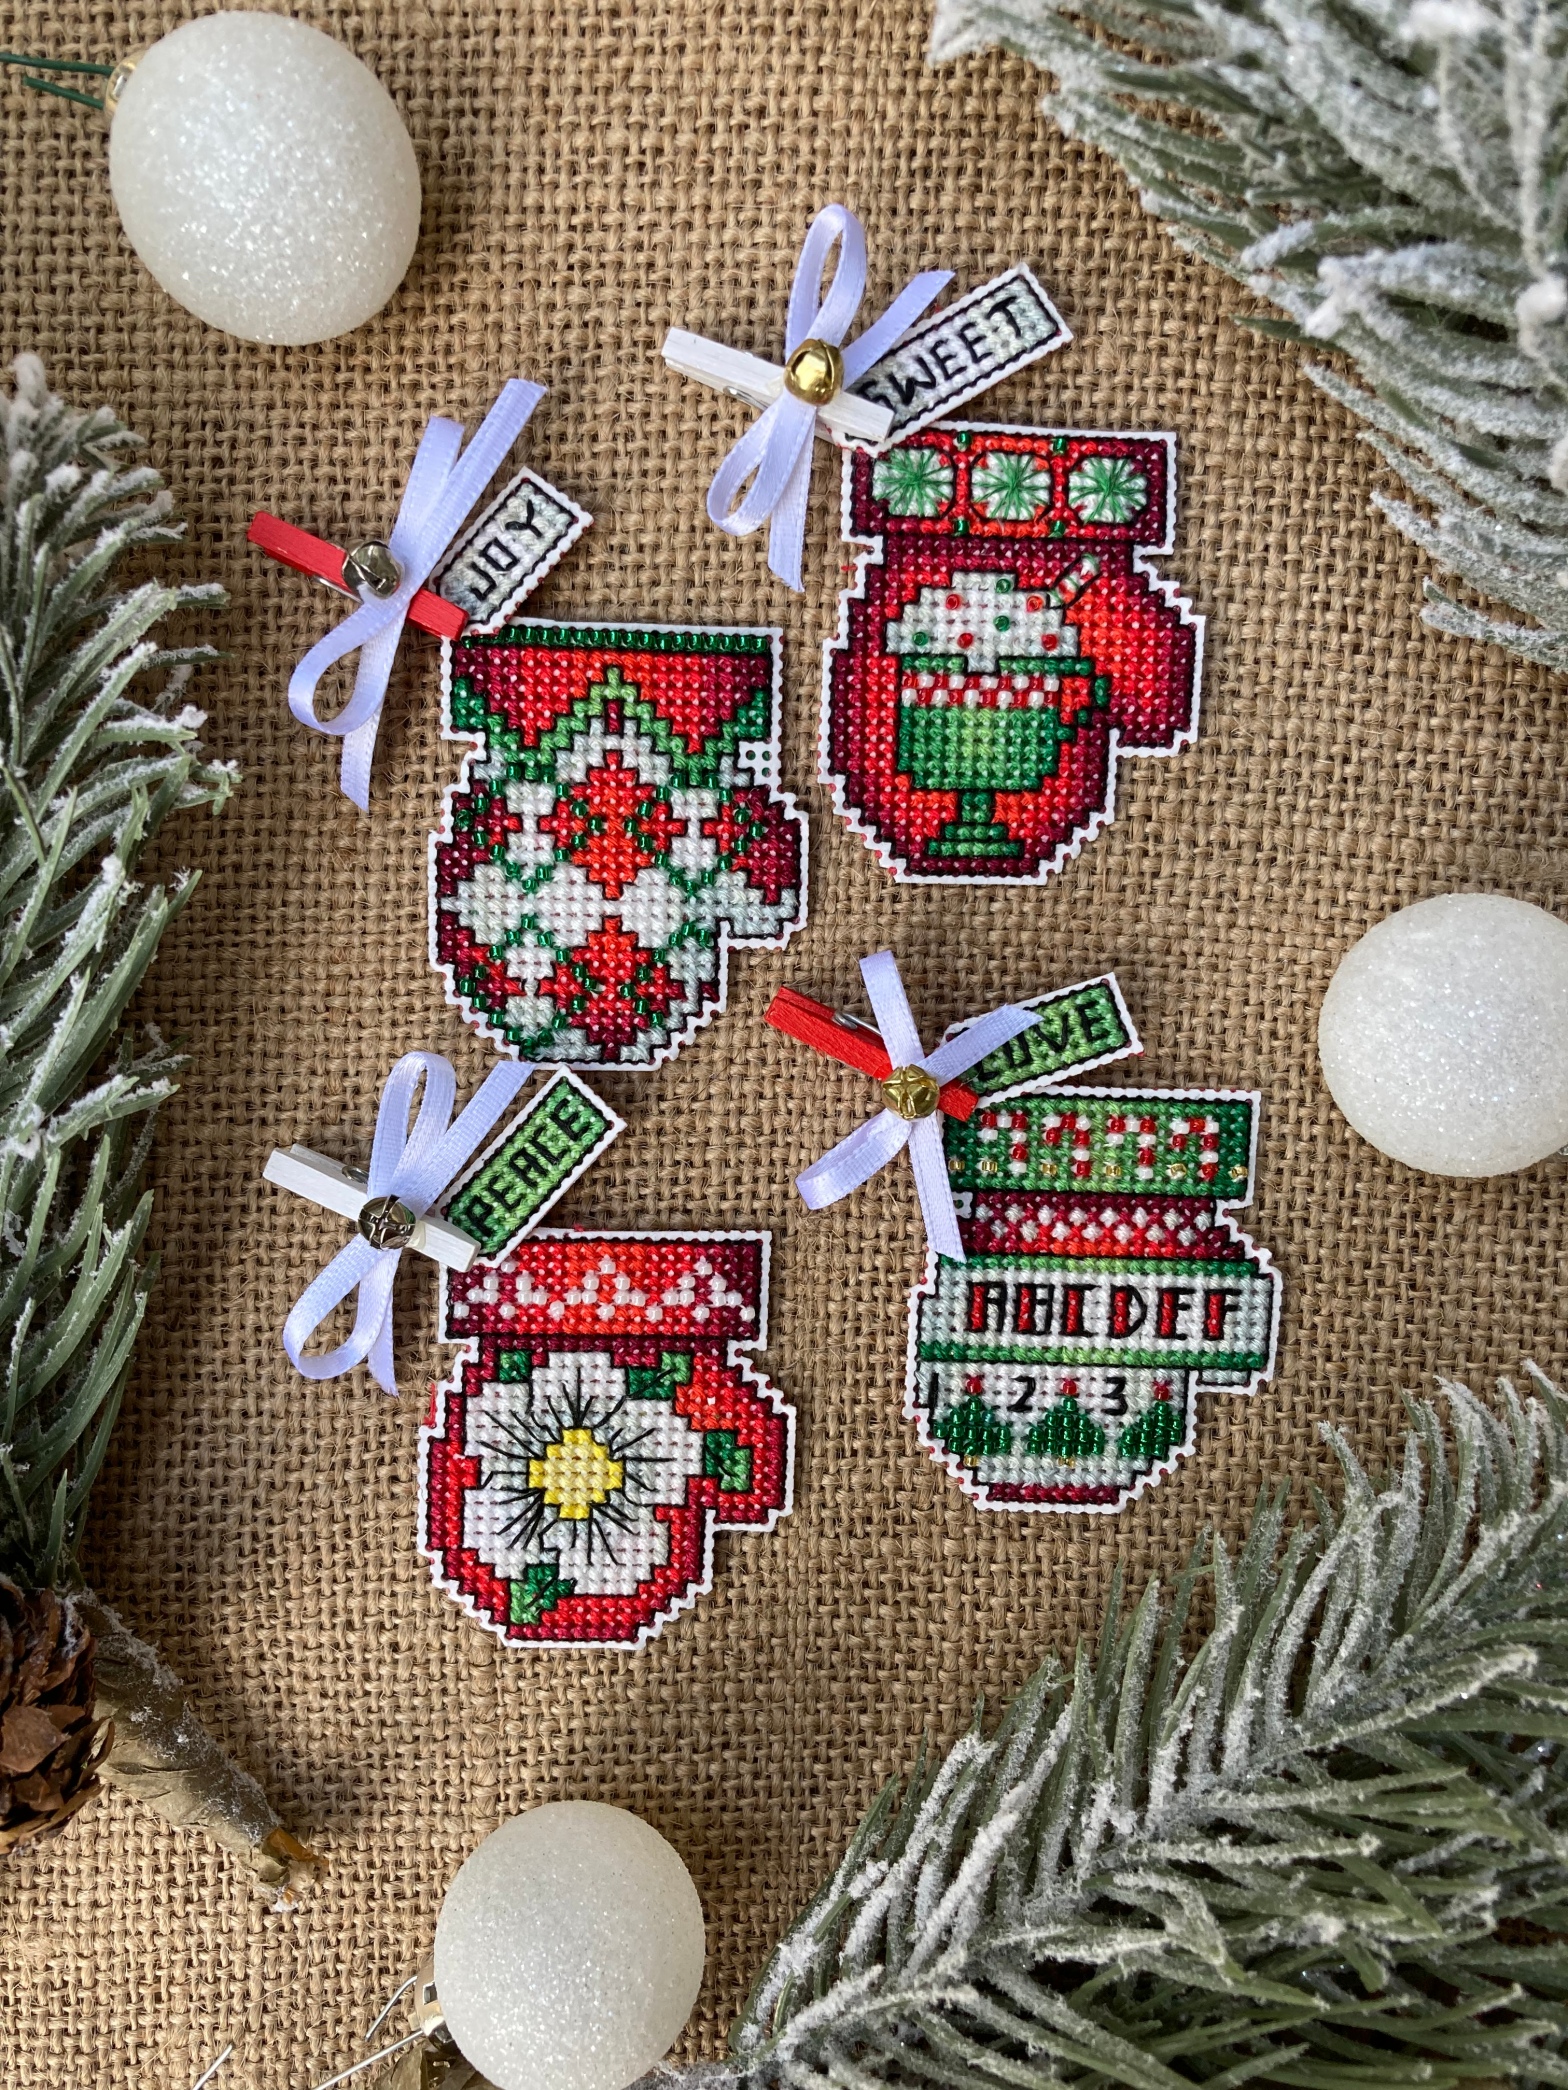 Counted Cross-Stitch Patterns - Tiny Christmas Ornaments Cross